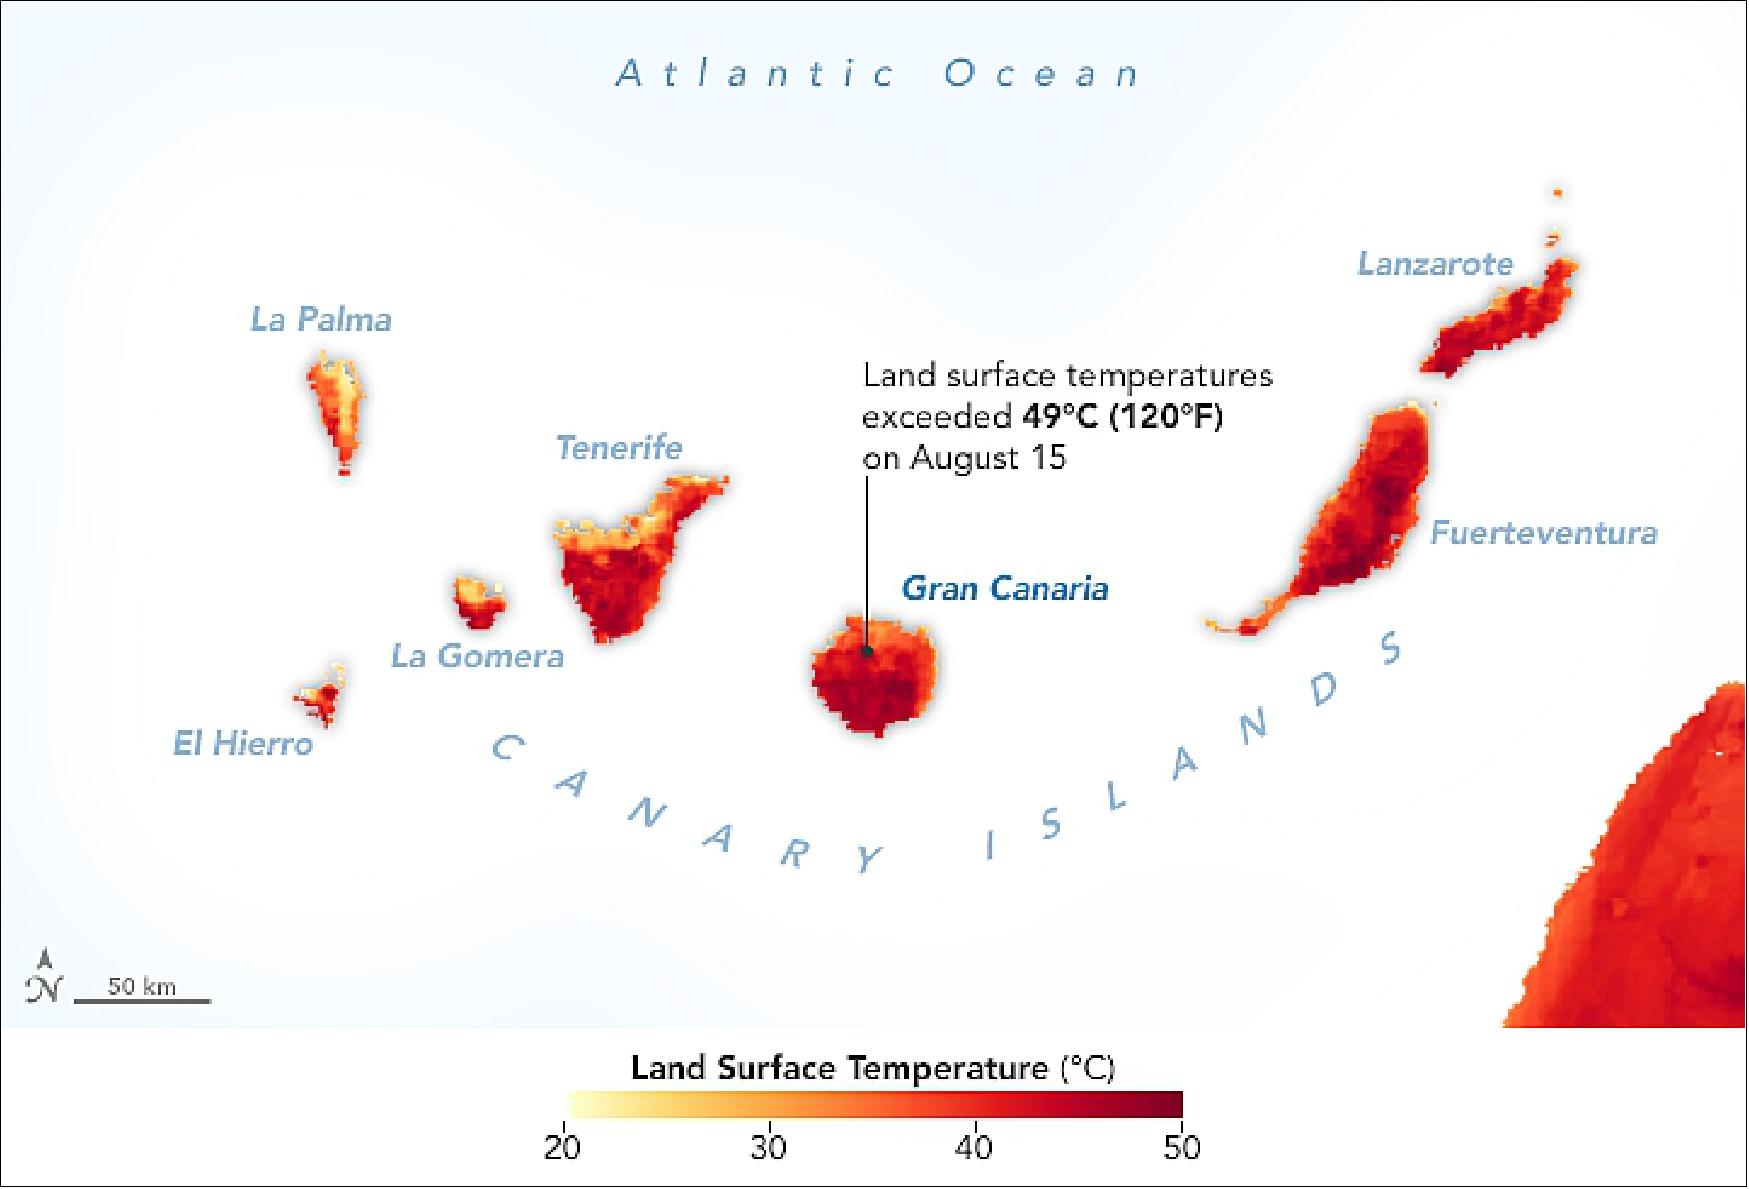 Figure 43: This map shows land surface temperatures on the afternoon of August 15, a day when temperatures exceeded 49°C (120°F) in some areas. The map is based on data collected by the MODIS instrument on NASA's Aqua satellite. Note that the map depicts land surface temperatures, not air temperatures. Land surface temperatures reflect how hot the surface of the Earth would feel to the touch in a particular location. They can sometimes be significantly hotter or cooler than air temperatures. (image credit: NASA Earth Observatory, image by Joshua Stevens, using data from the Level 1 and Atmospheres Active Distribution System (LAADS) and Land Atmosphere Near real-time Capability for EOS (LANCE), story by Adam Voiland)